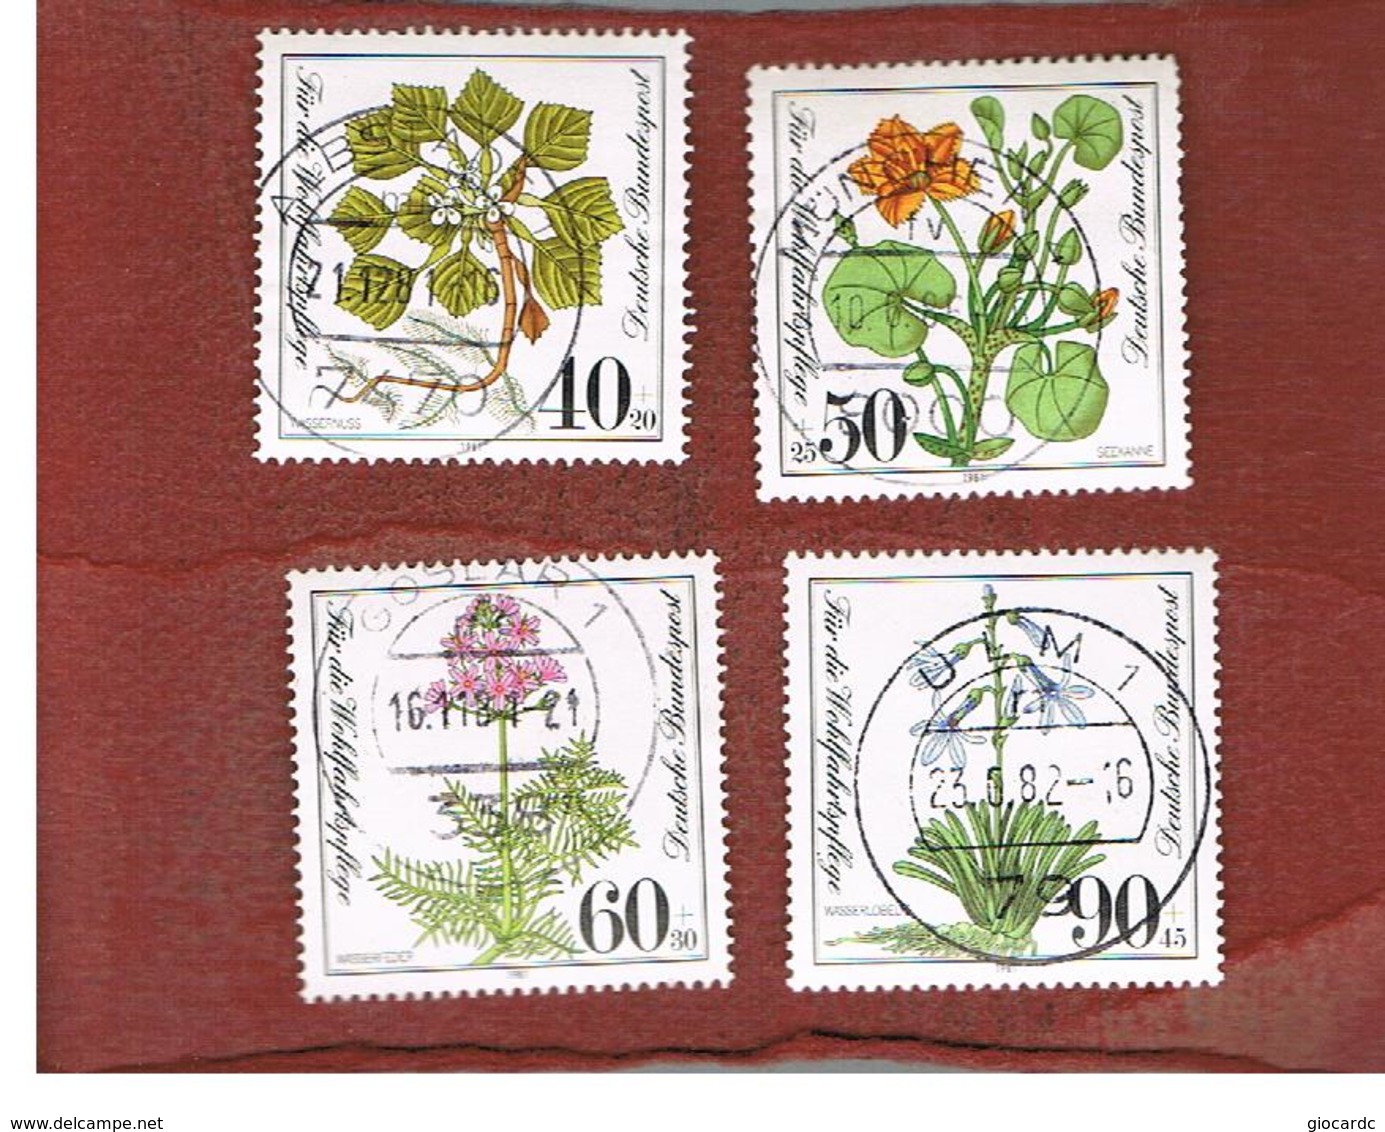 GERMANIA (GERMANY) - SG 1969.1971 - 1981 HUMANITARIAN RELIEF FUND: WILDFLOWERS (COMPLET SET OF 4)  USED - Used Stamps